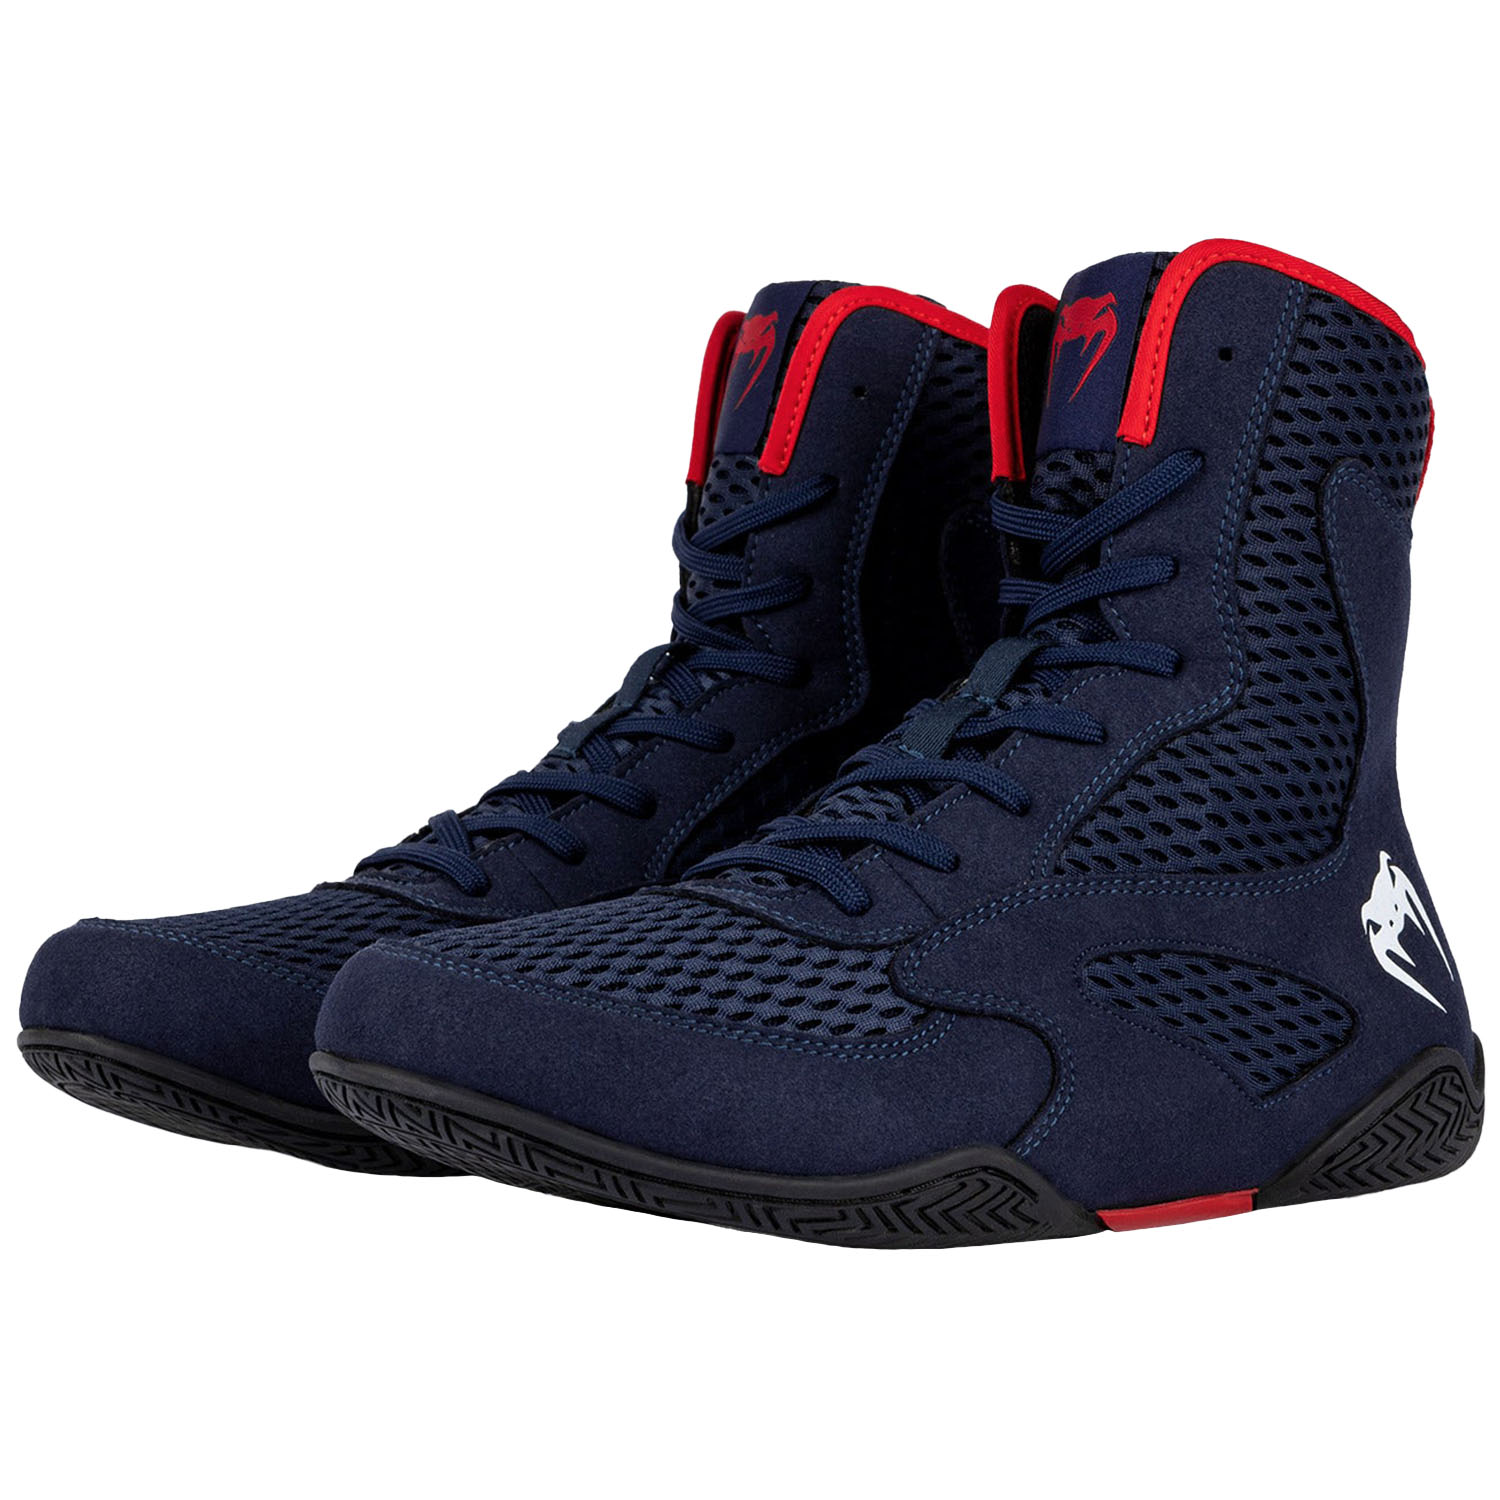 VENUM Boxing Shoes, Contender, navy-red